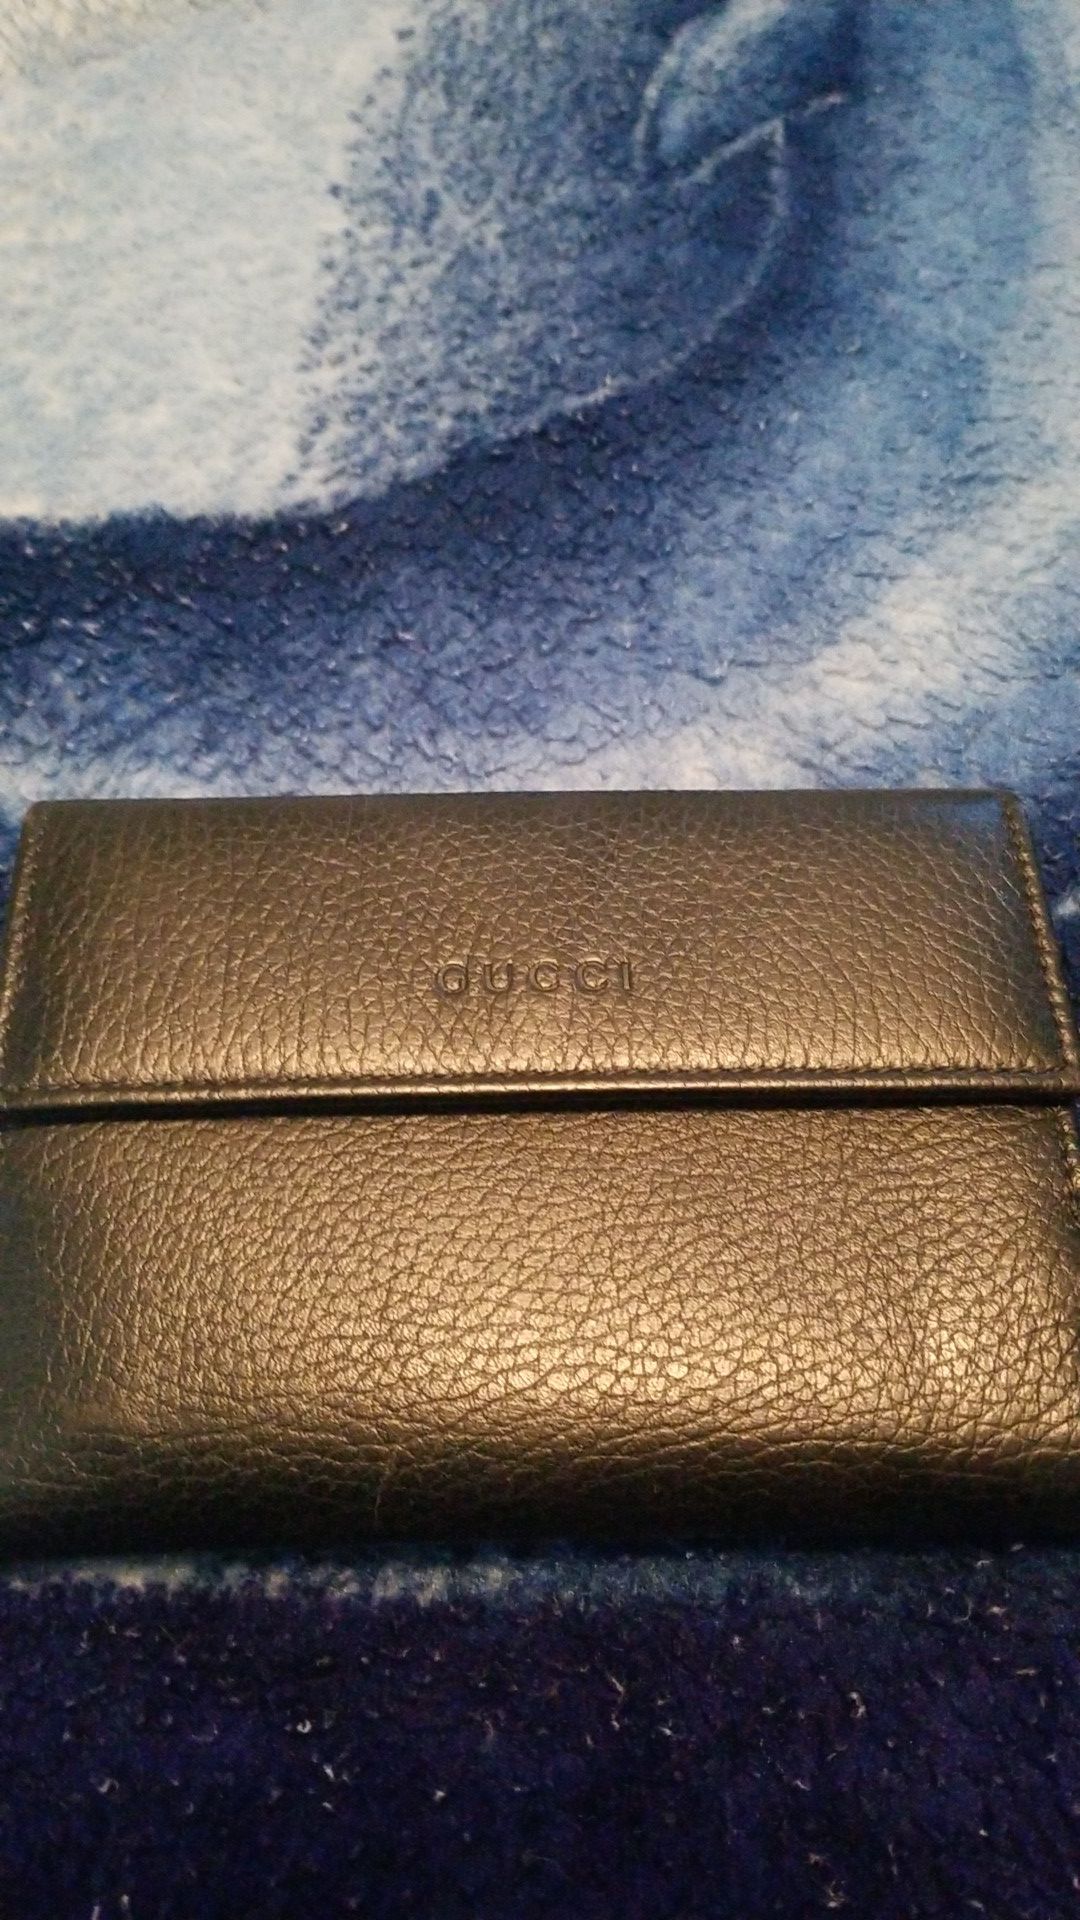 Used gucci wallet in good condition